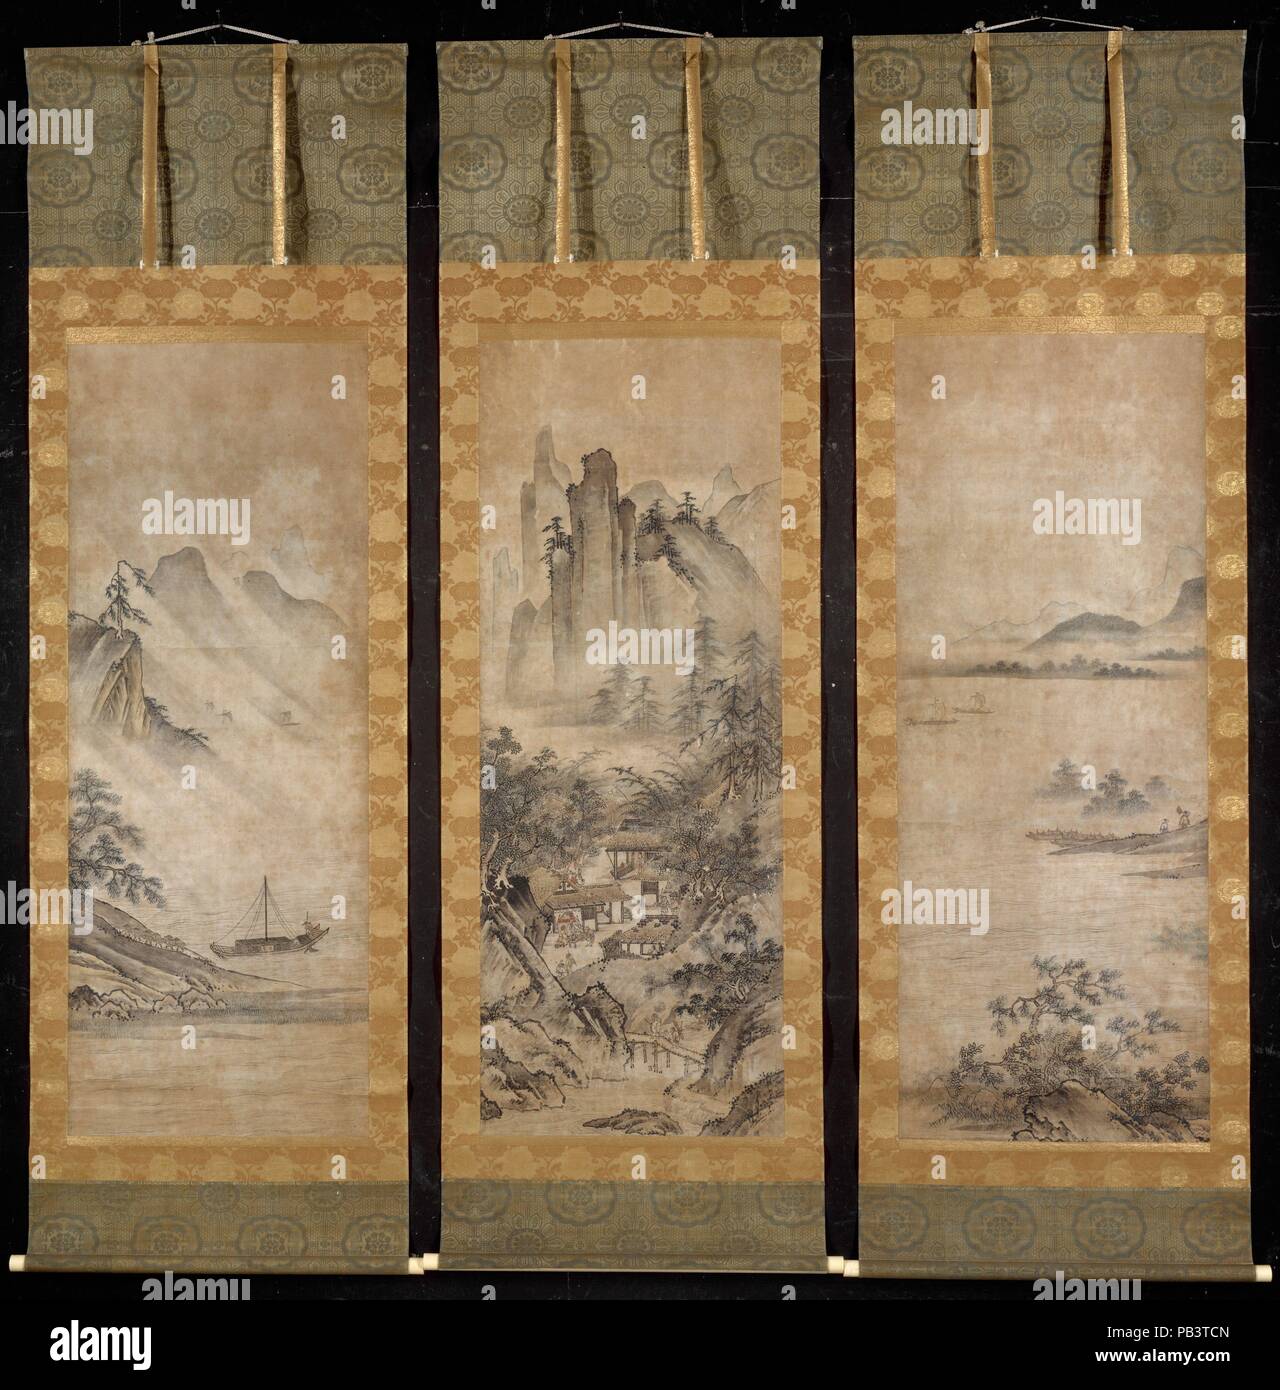 Eight Views of Xiao and Xiang. Culture: Japan. Dimensions: 60 7/8 x 23 1/4 in. (154.6 x 59.1 cm)  Entire scroll: 93 3/4 x 29 3/8 in. (238.1 x 74.6 cm)  Width w/ rollers: 31 3/4 in. (80.6 cm). Date: 16th century.  The theme of the Eight Views of the Xiao and Xiang Rivers celebrates man's emotional response to nature's changing moods. First developed in Chinese poetry and painting during the eleventh century, it was introduced to Japan in the fourteenth century and became a major theme in Japanese ink painting.   In this triptych, the central image, with its bustling activity and clear light, re Stock Photo